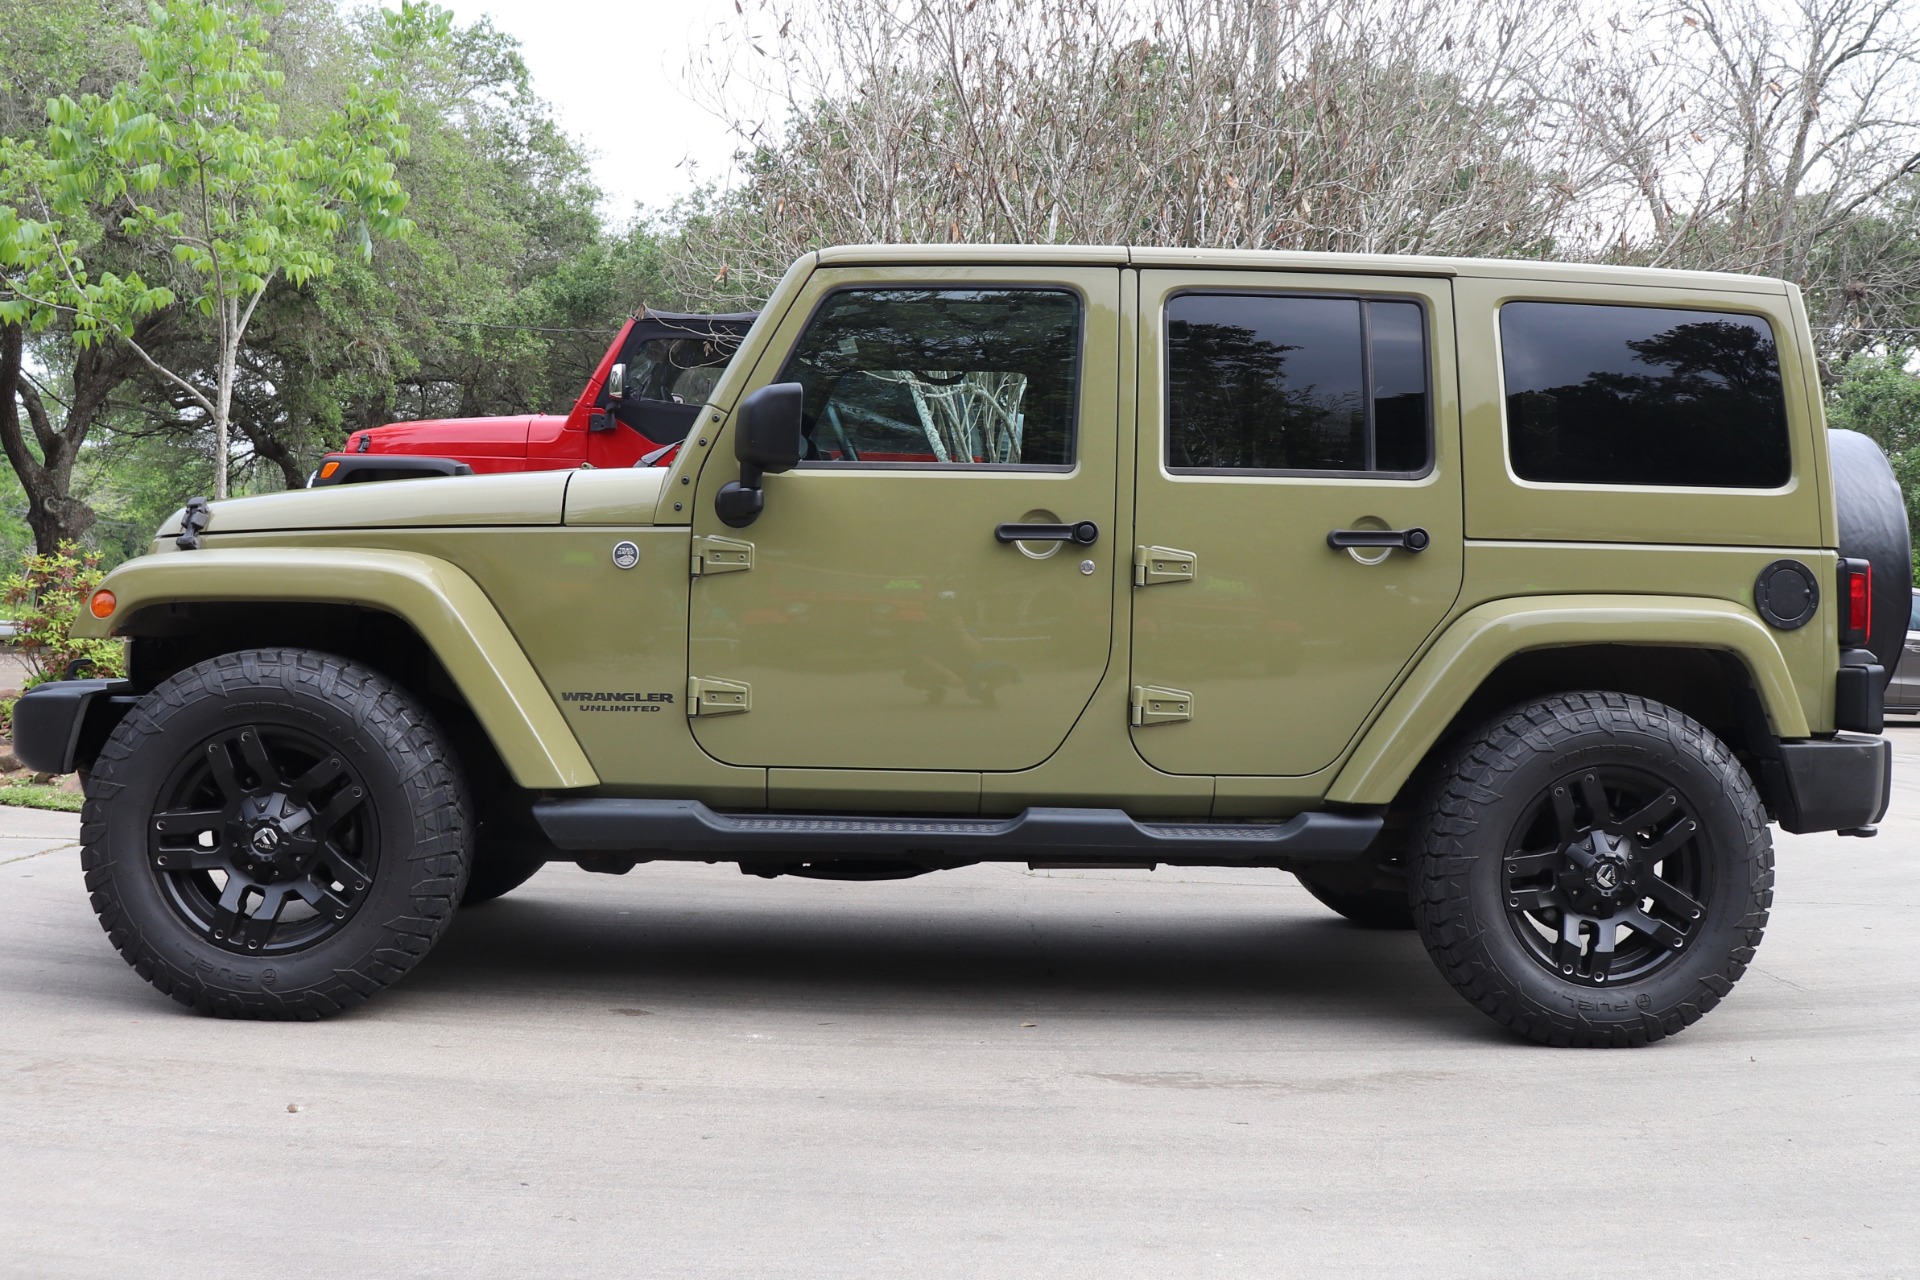 Used 2013 Jeep Wrangler Unlimited Sahara For Sale 30995 Select